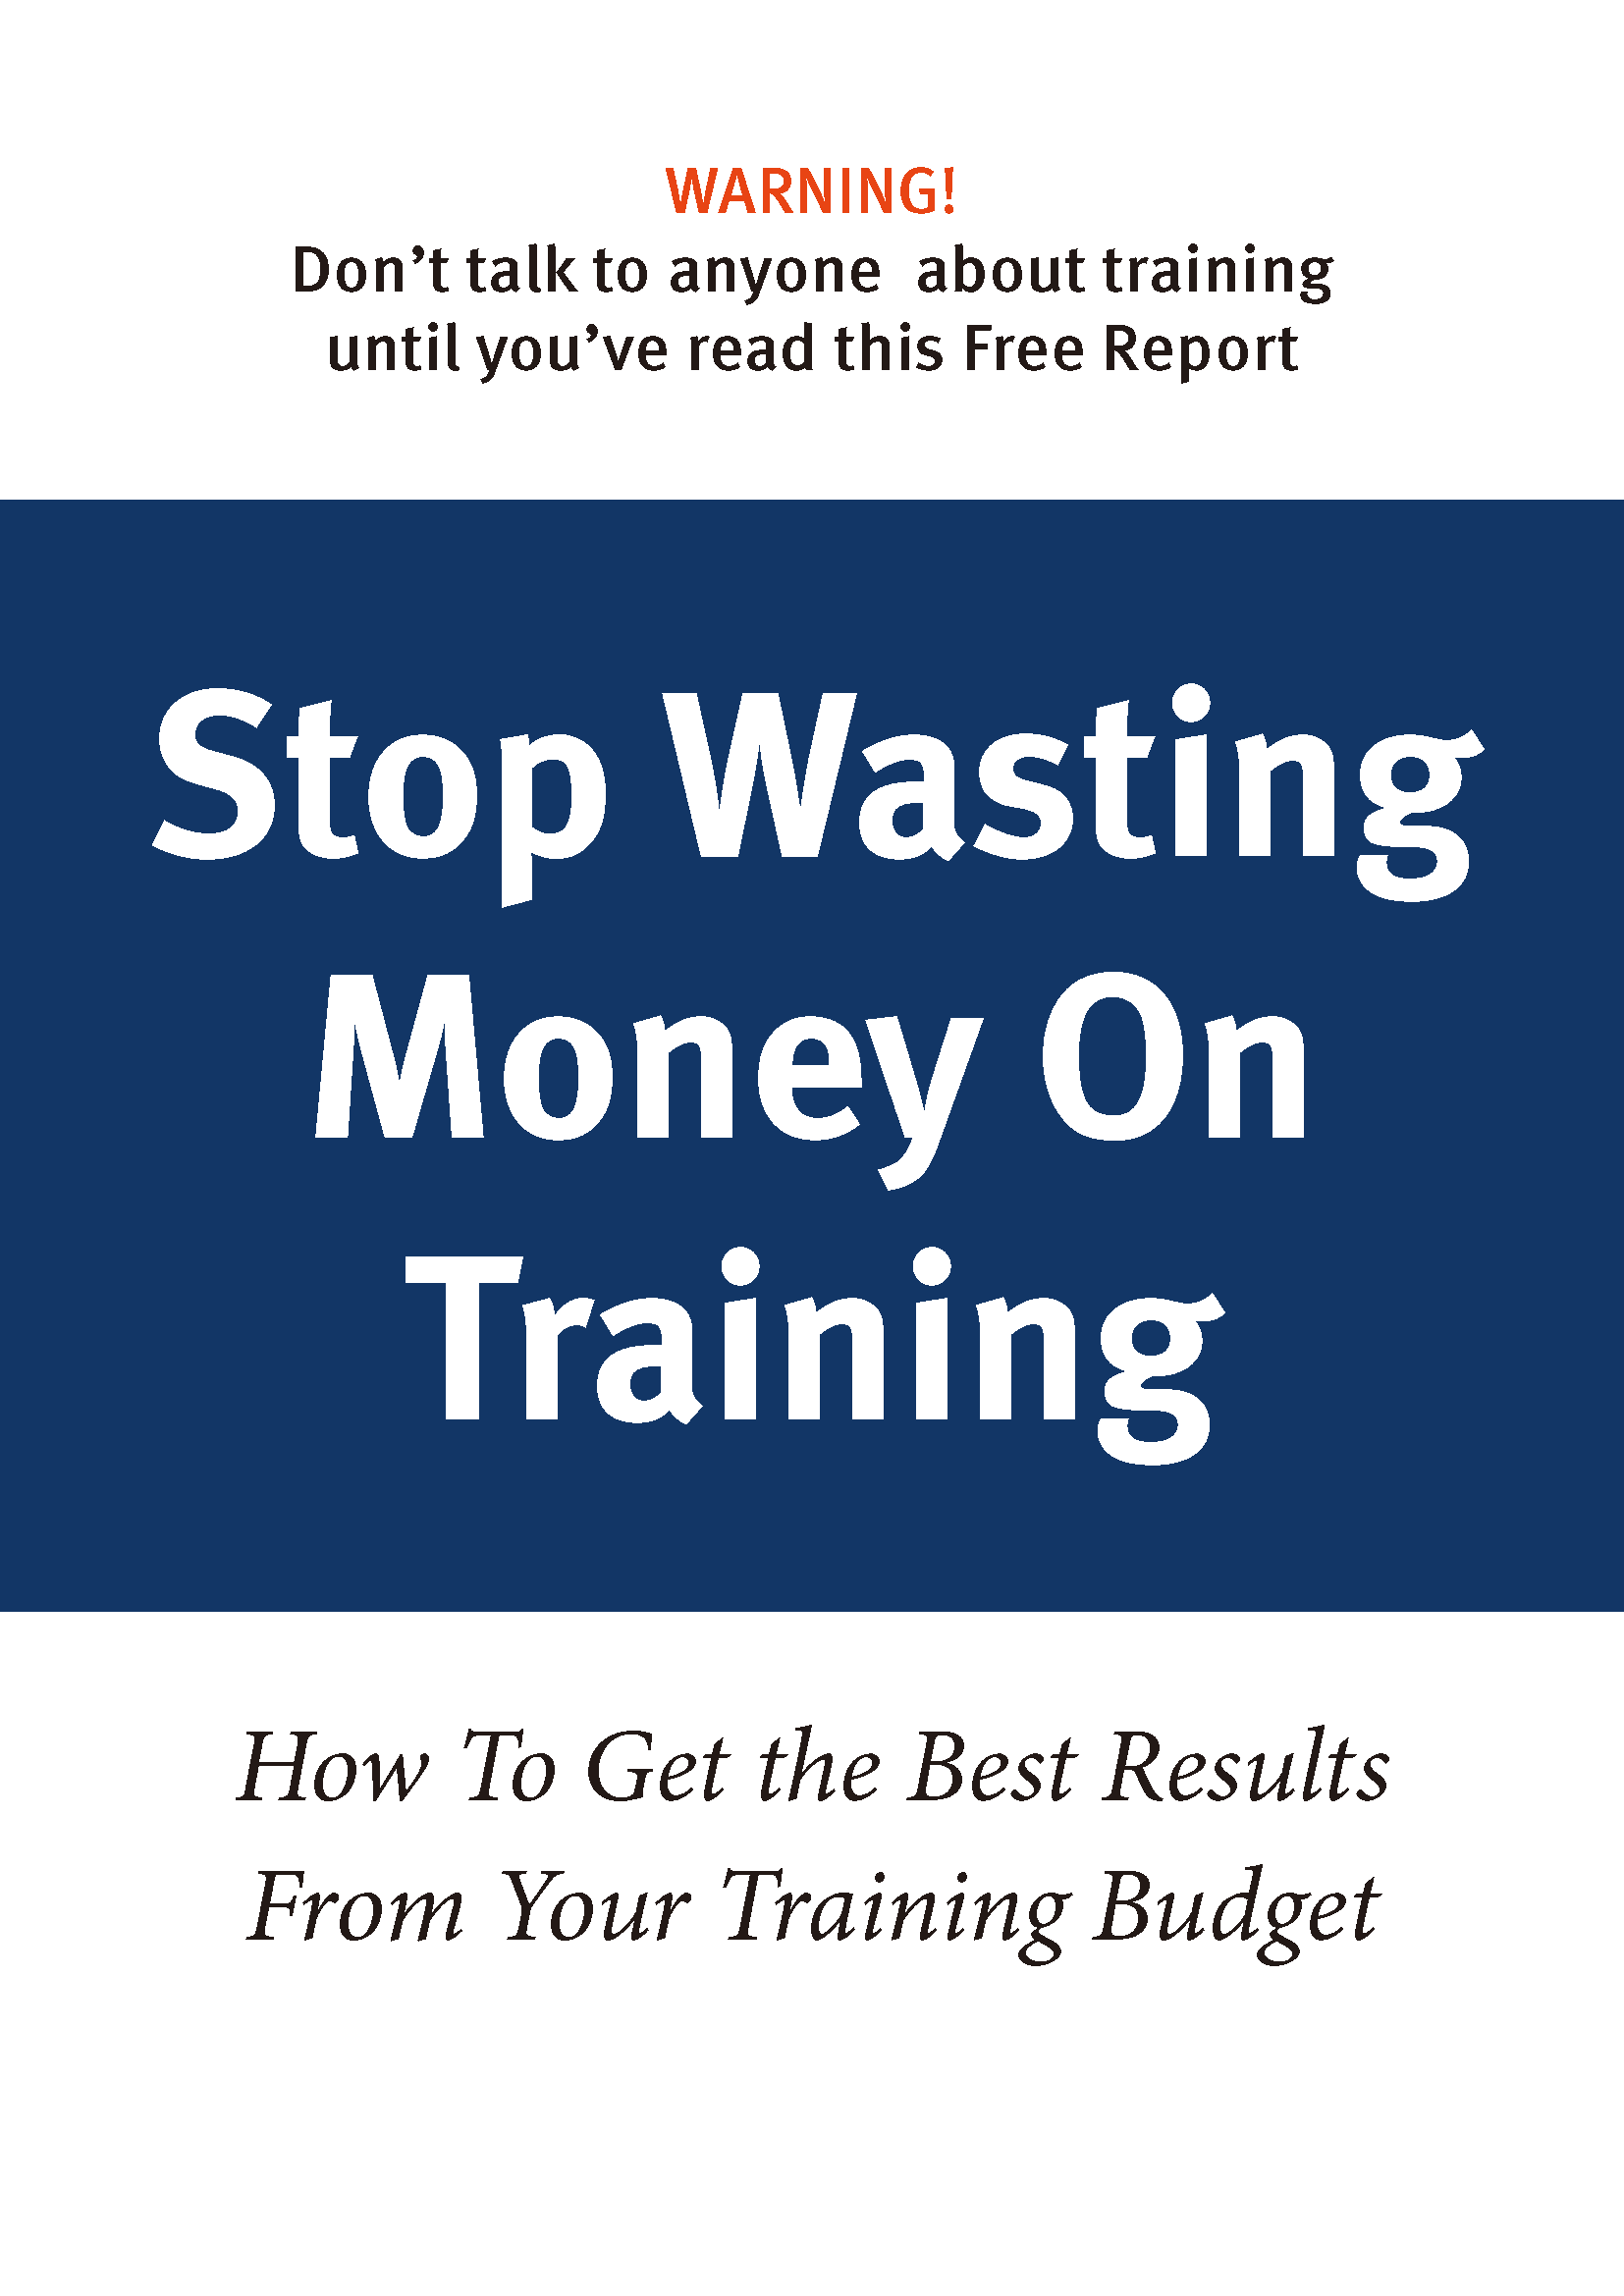 Stop Wasting Money On Training: How To Get the Best Results From Your Training Budget